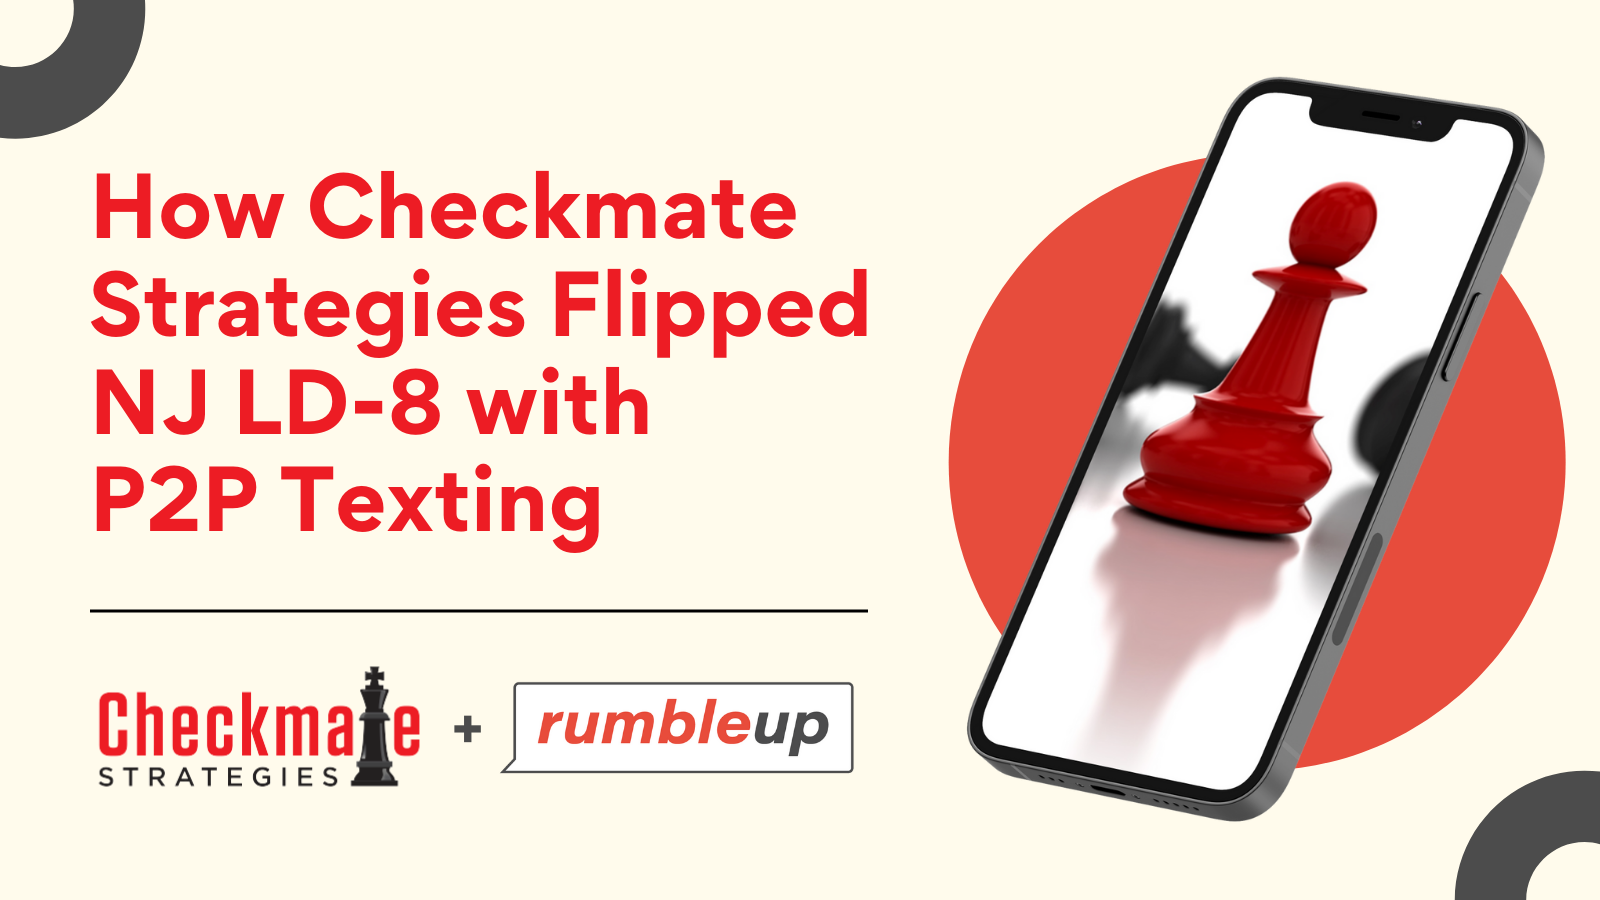 How Checkmate Strategies Flipped NJ LD-8 in 2021 with a Phenomenal Layered P2P Texting Plan